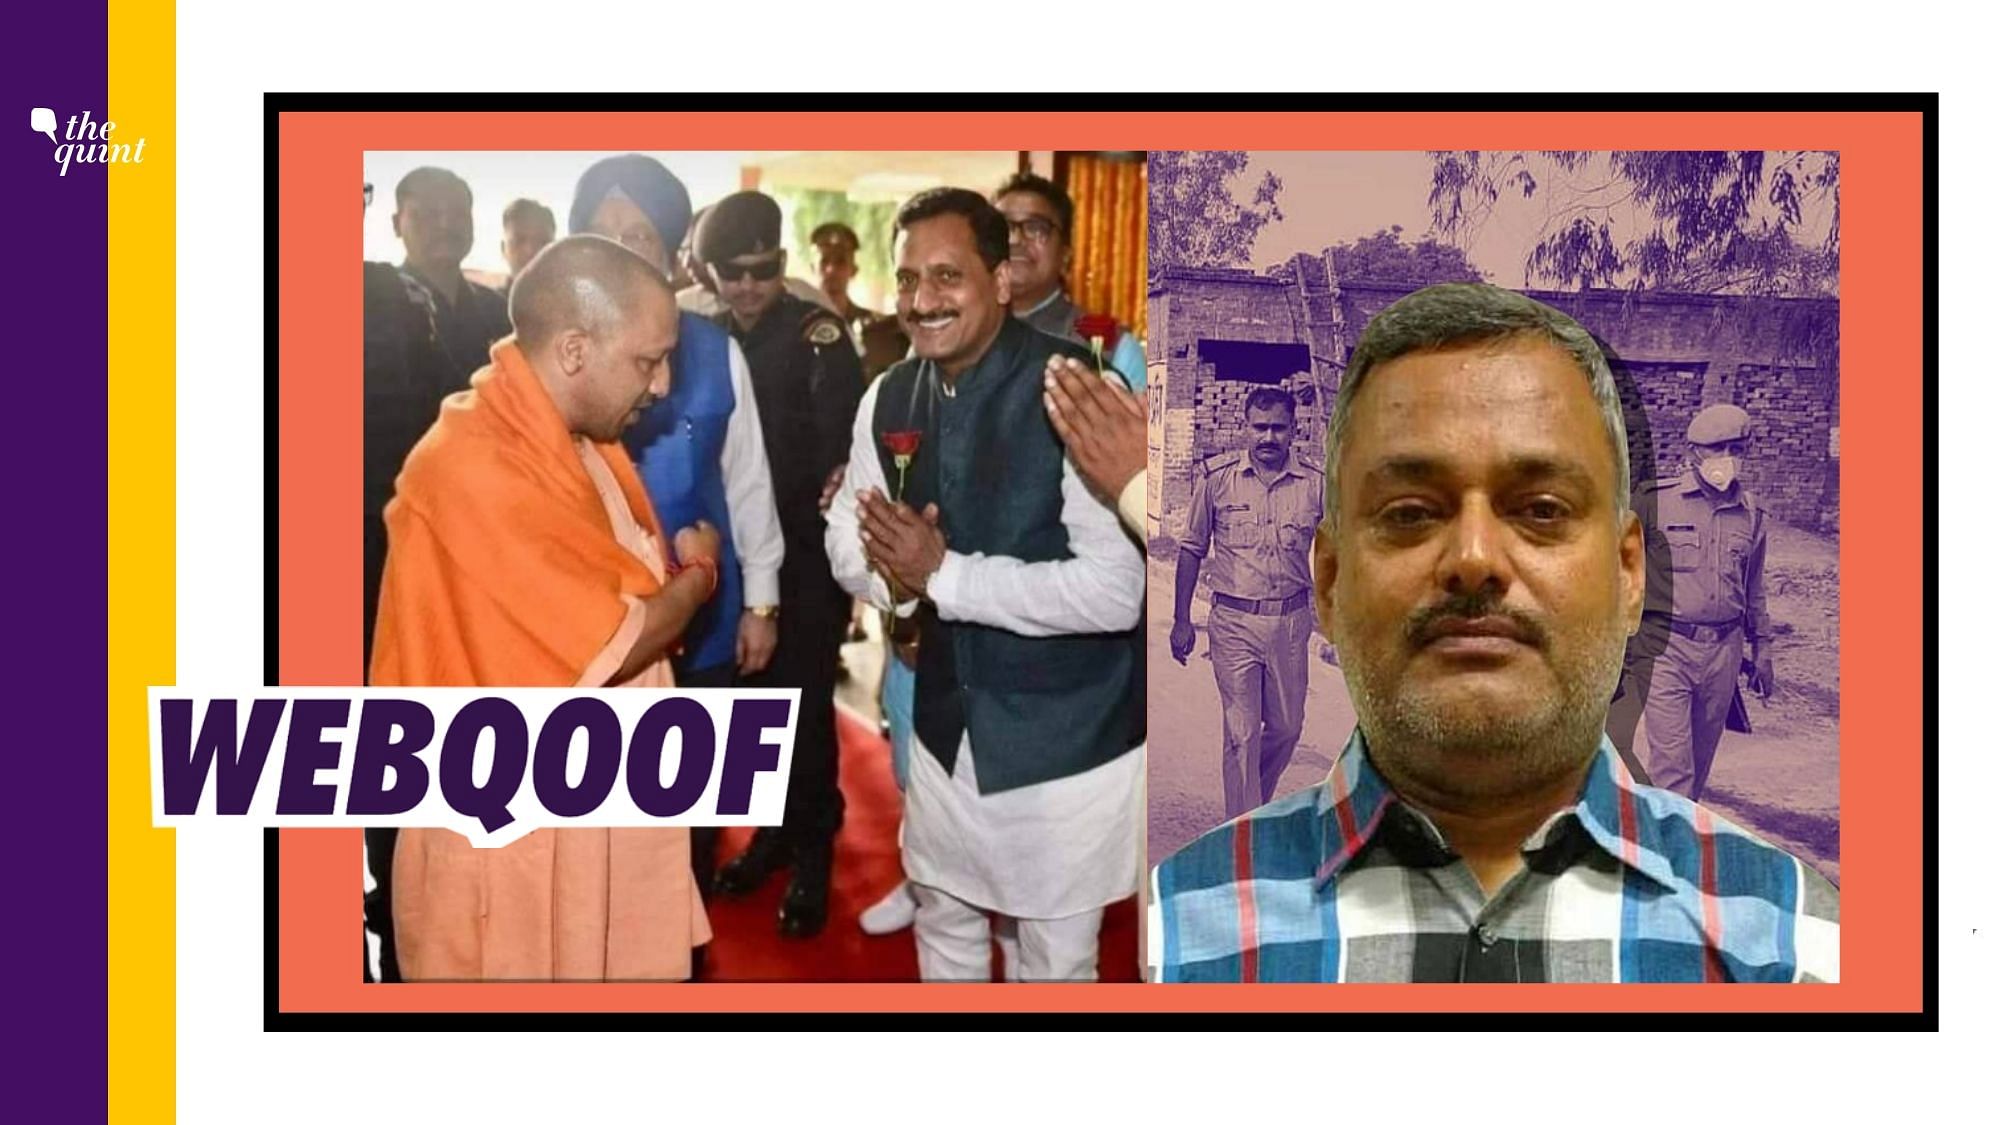 Social media users falsely claimed that the viral image showed UP Chief Minister Yogi Adityanath with the accused Vikas Dubey.